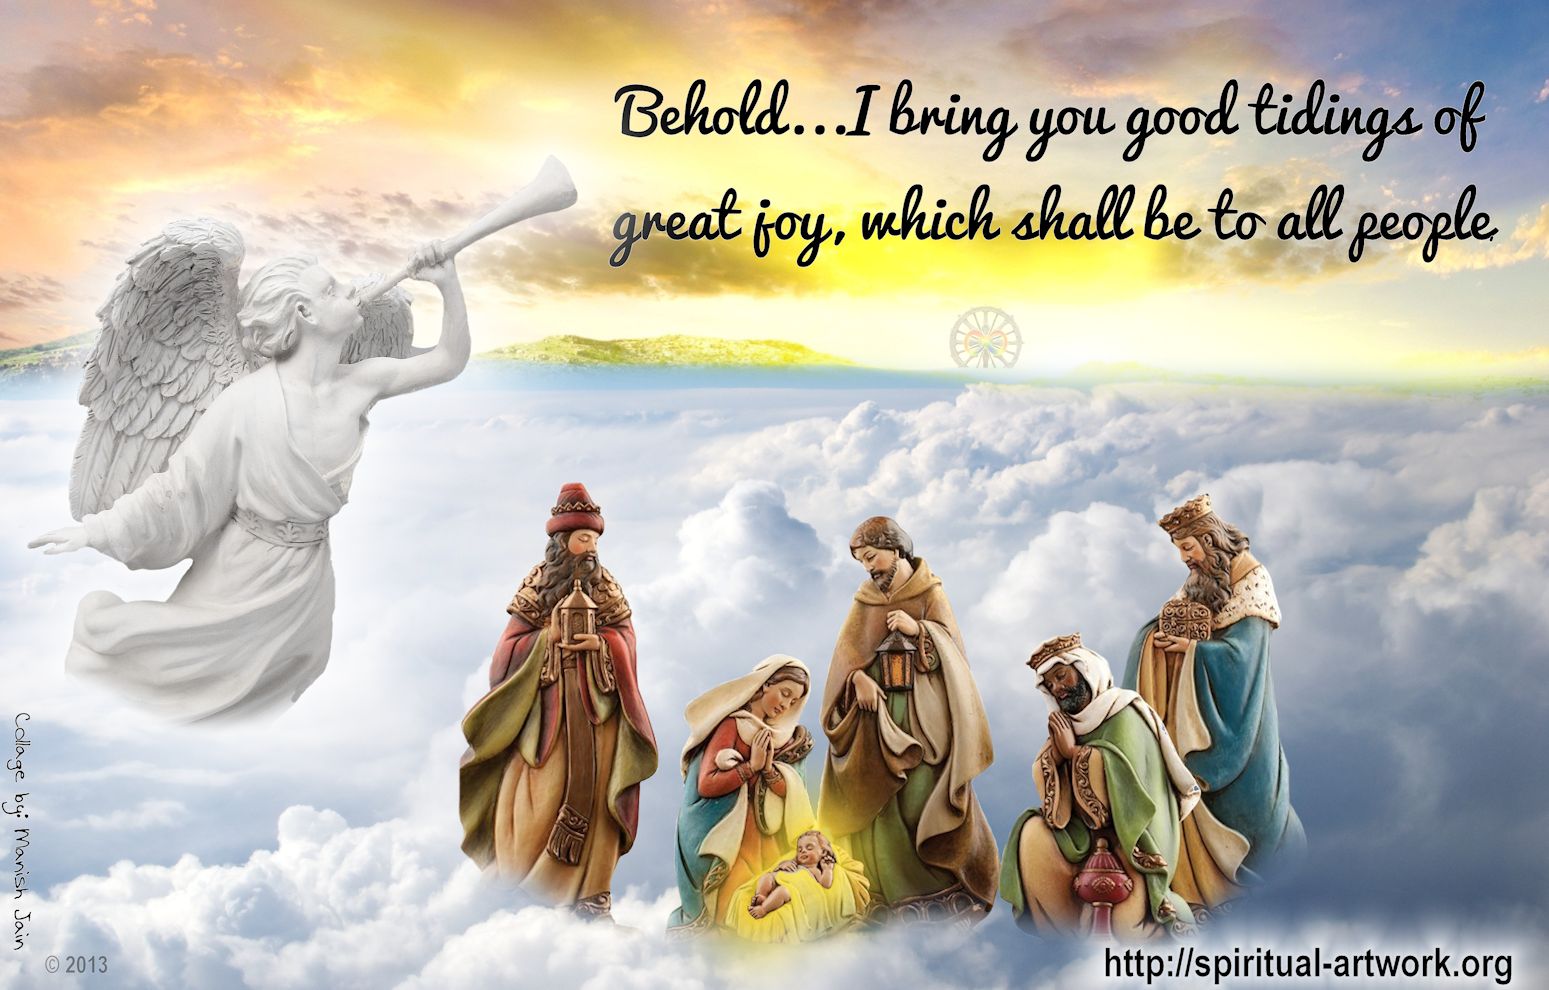 Quotes About Christmas Jesus Birth. QuotesGram